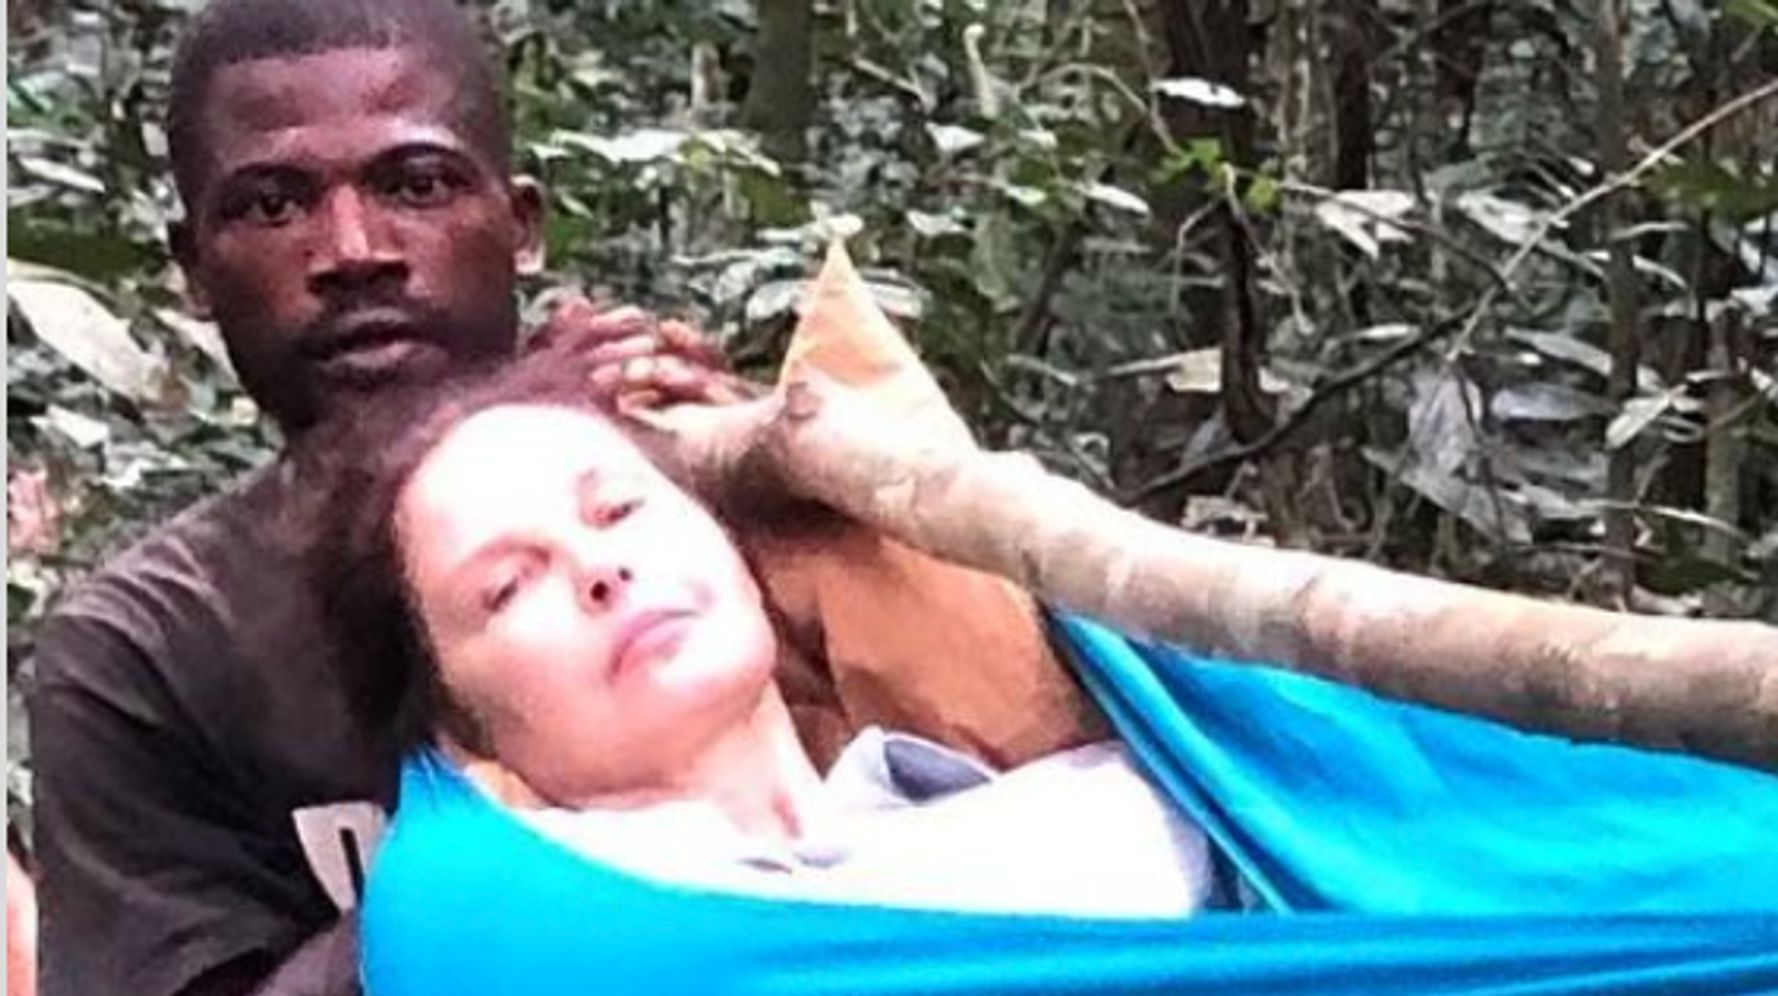 Ashley Judd’s photos of her terrible rescue in Congo highlight the heroes